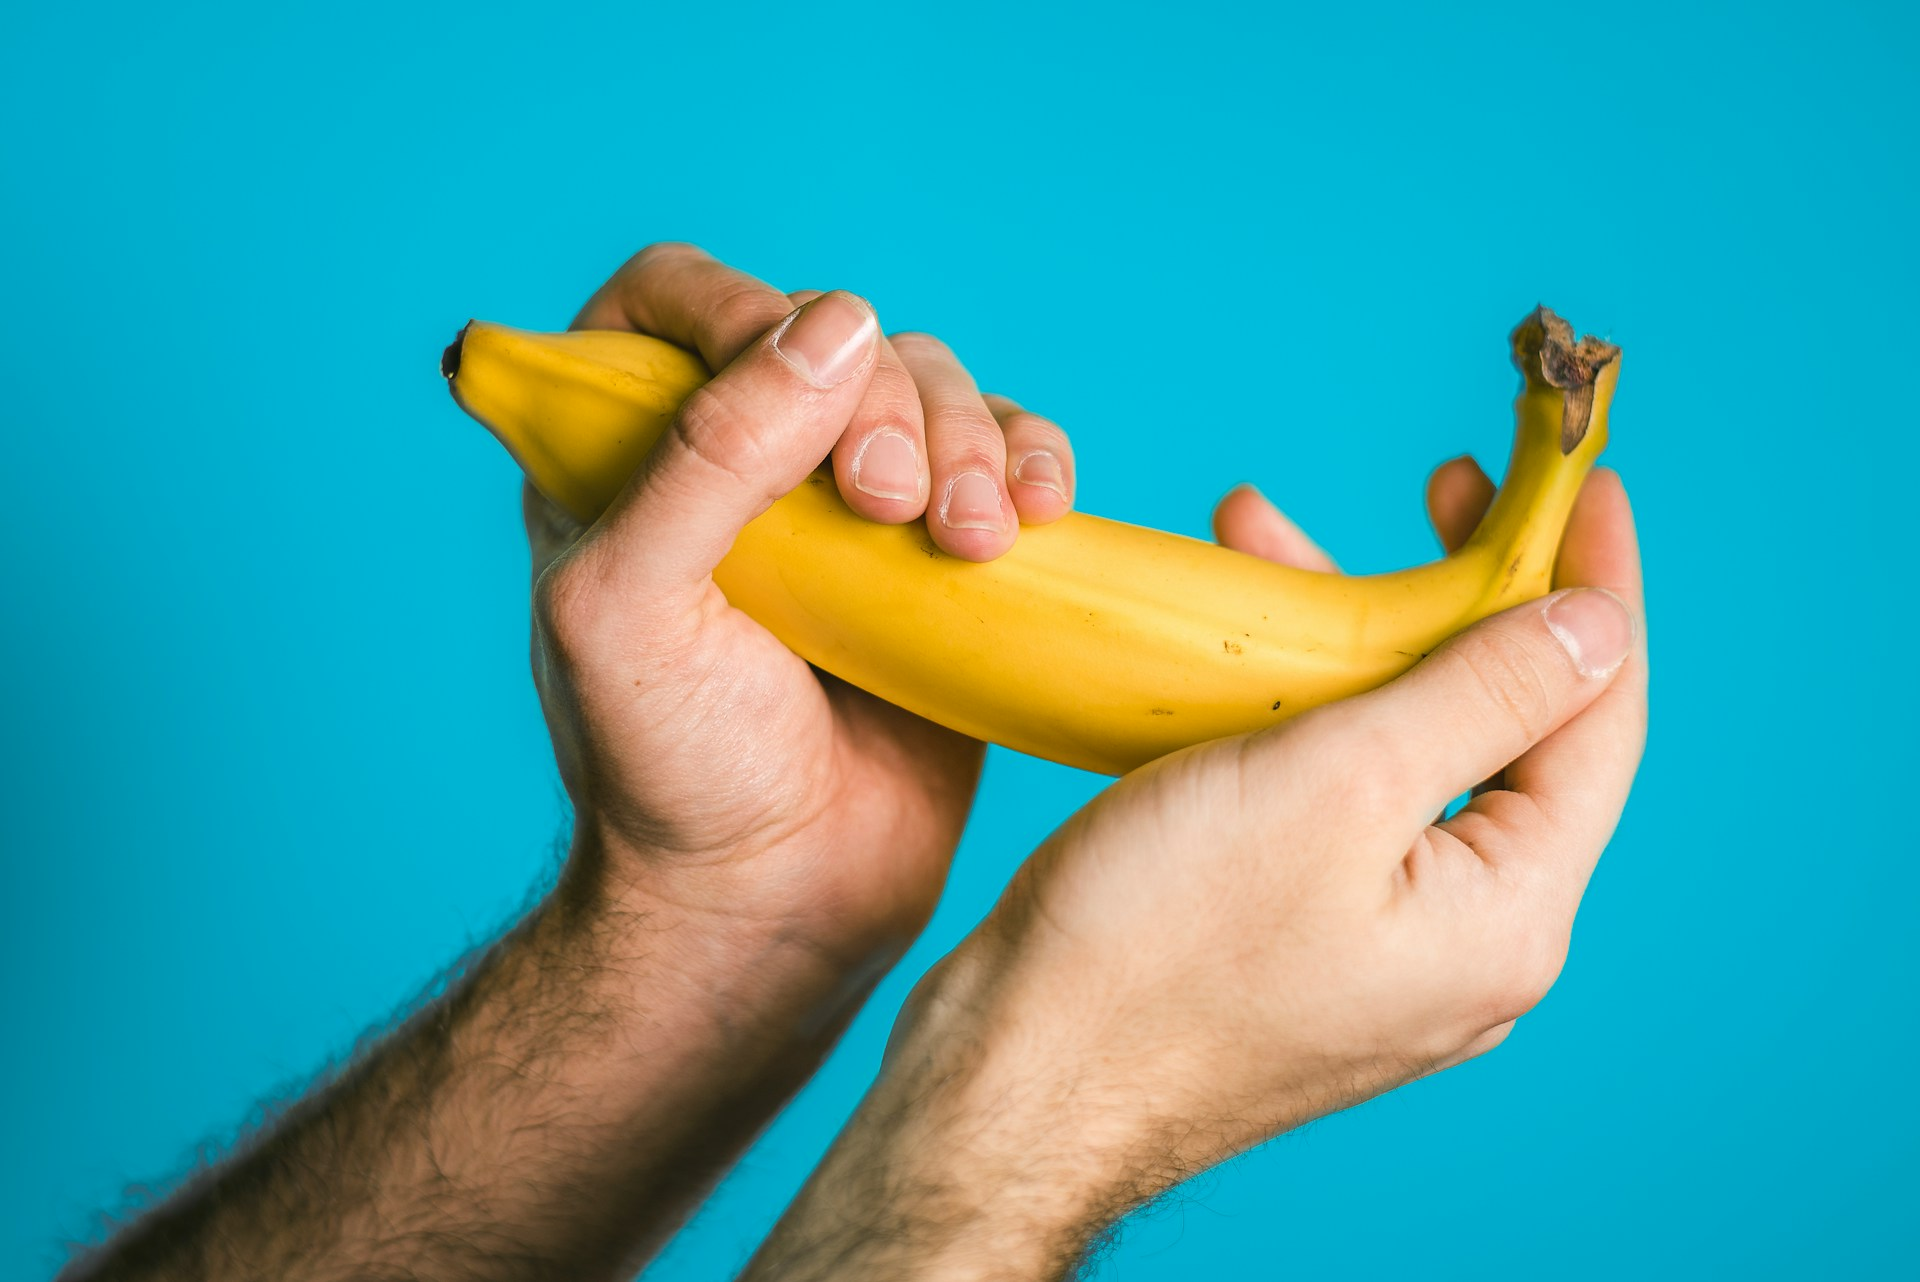 A man holding a banana to represent masturbating, which you can reduce the frequency of to increase semen production